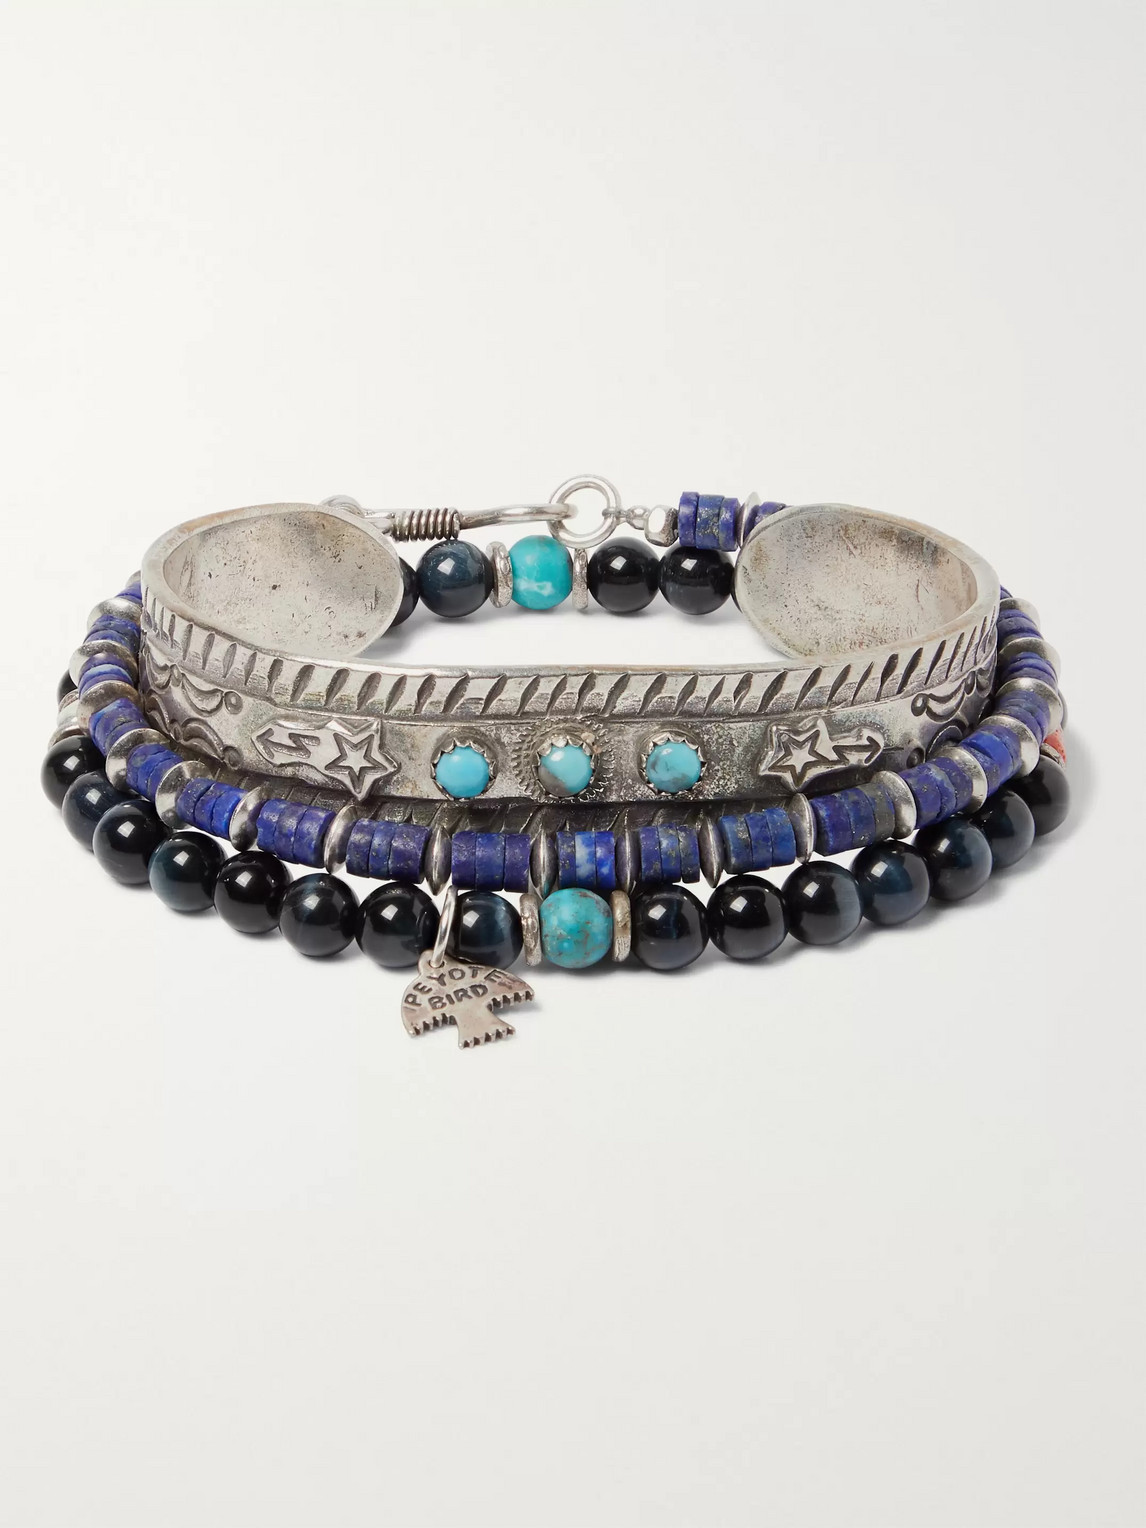 Peyote Bird Set Of Three Sterling Silver, Turquoise, Tiger's Eye And Lapis Heishi Bracelets In Blue